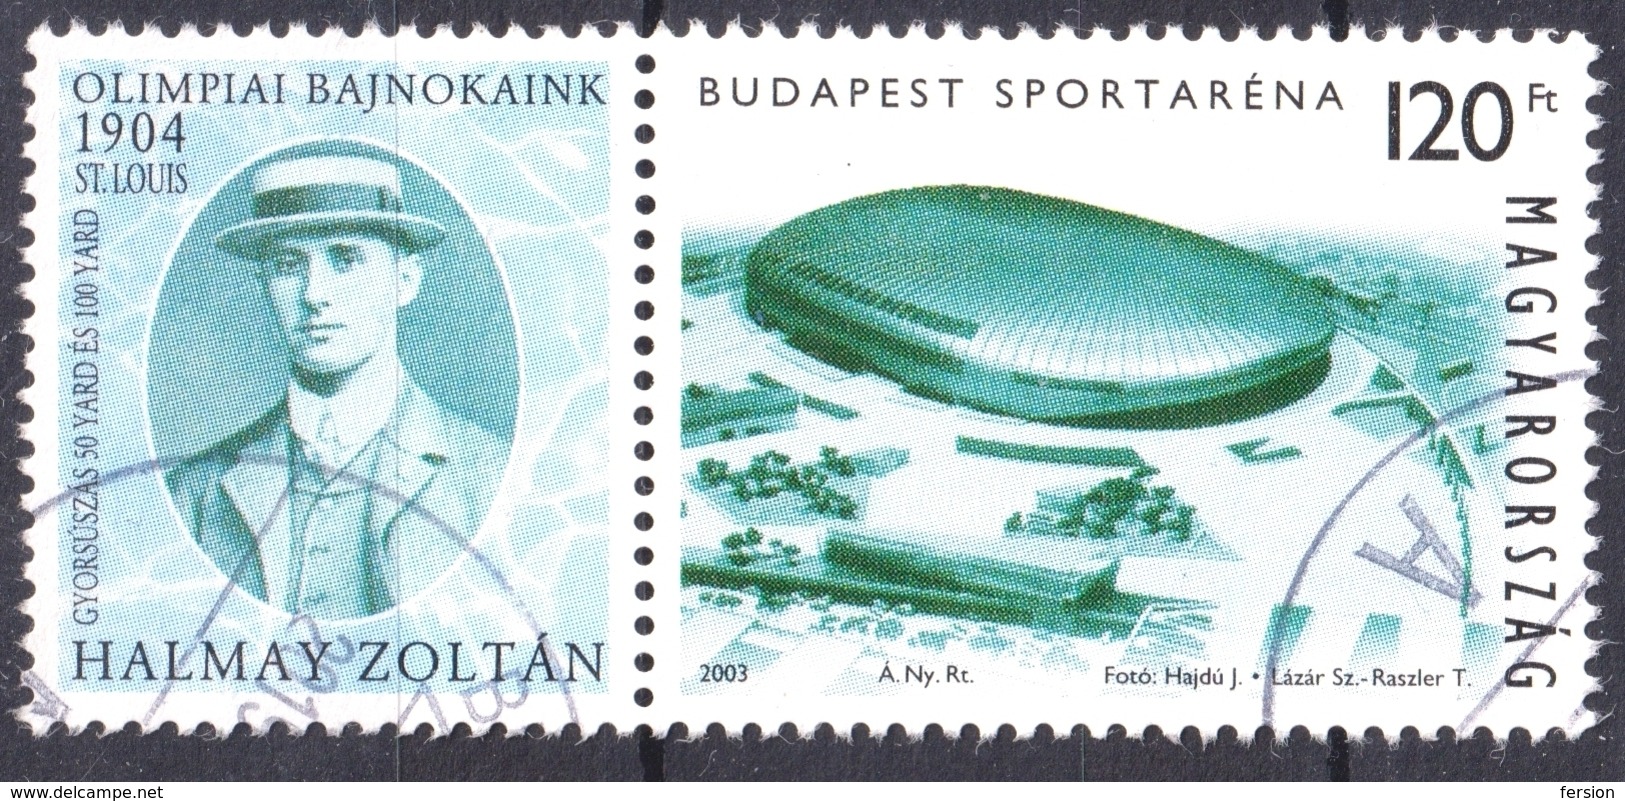 2003 Hungary St. Louis Summer Olympic Games Champion Zoltán Halmay Label Vignette Swimmer László Papp Budapest Arena - Verano 1904: St-Louis